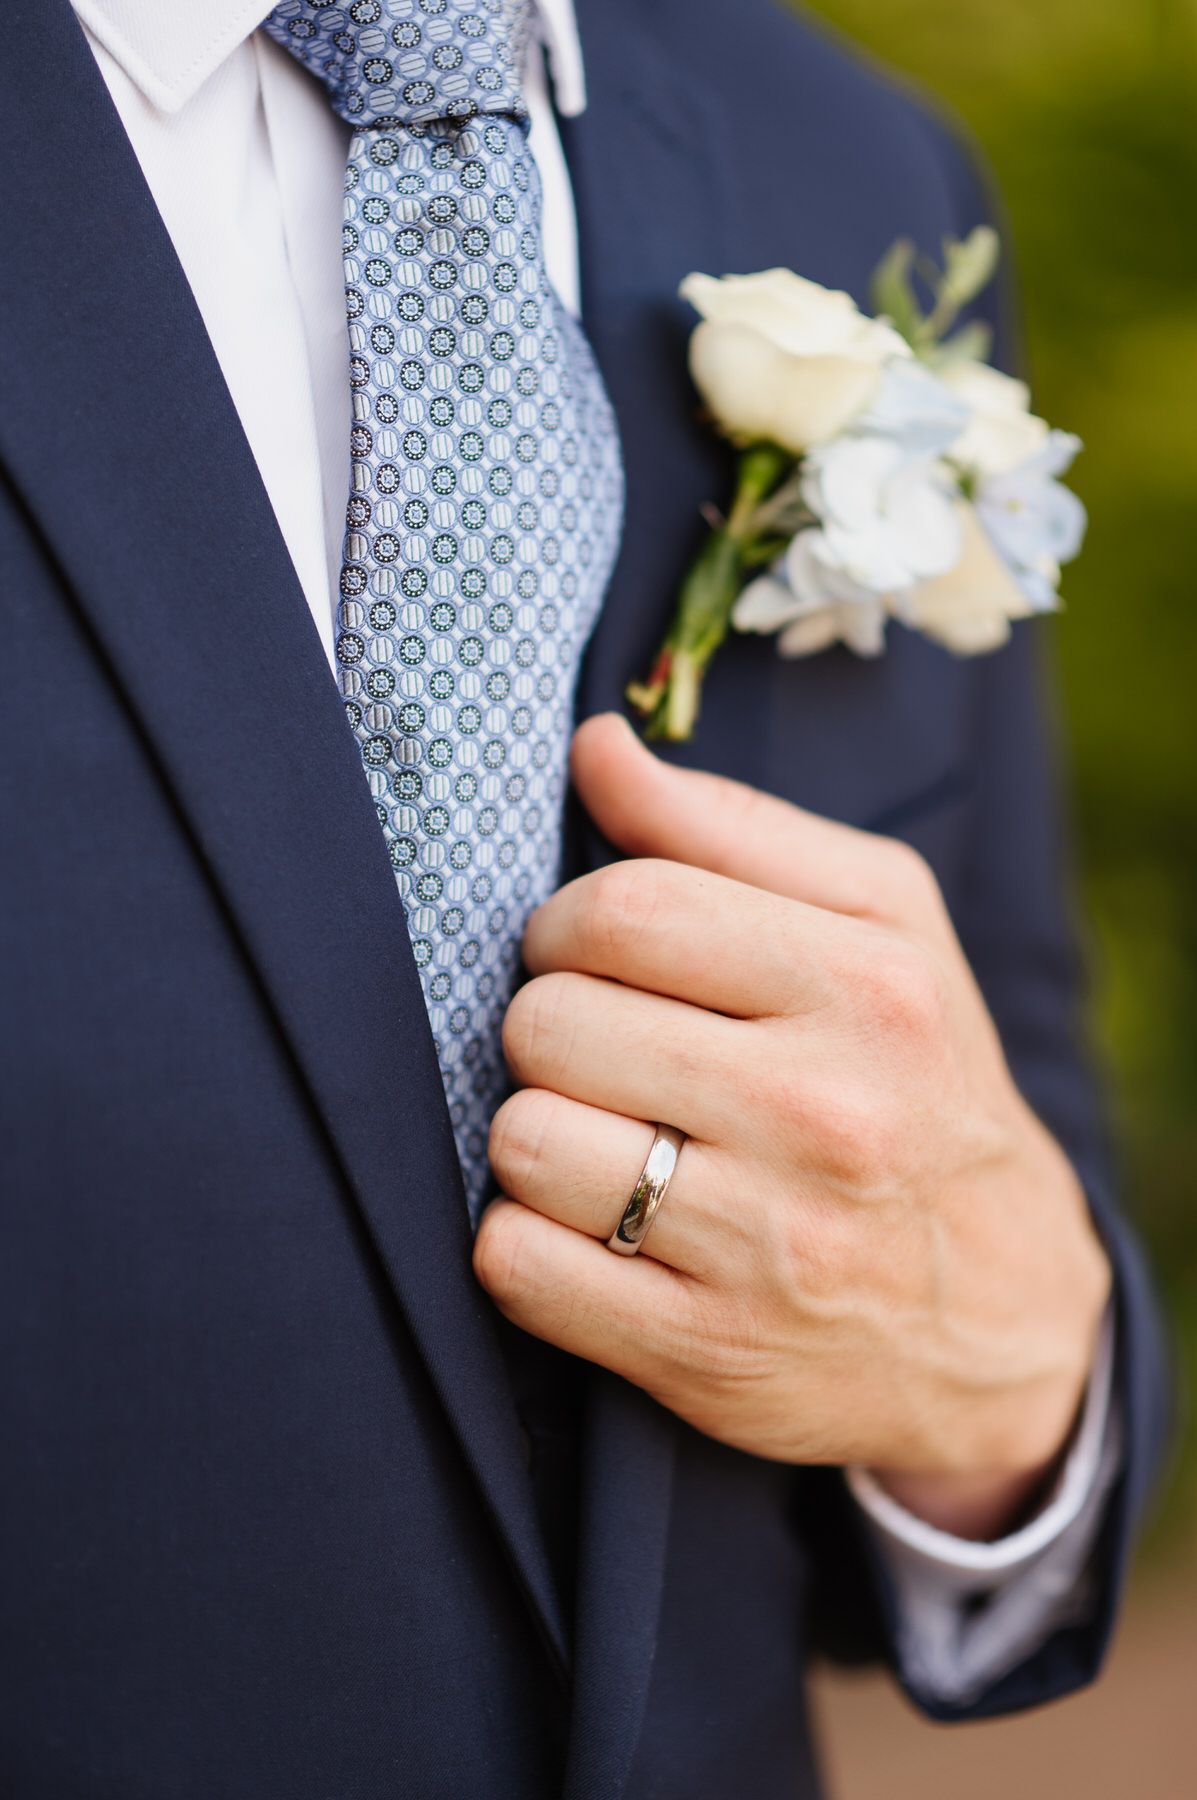 A man in a suit has a ring on his finger